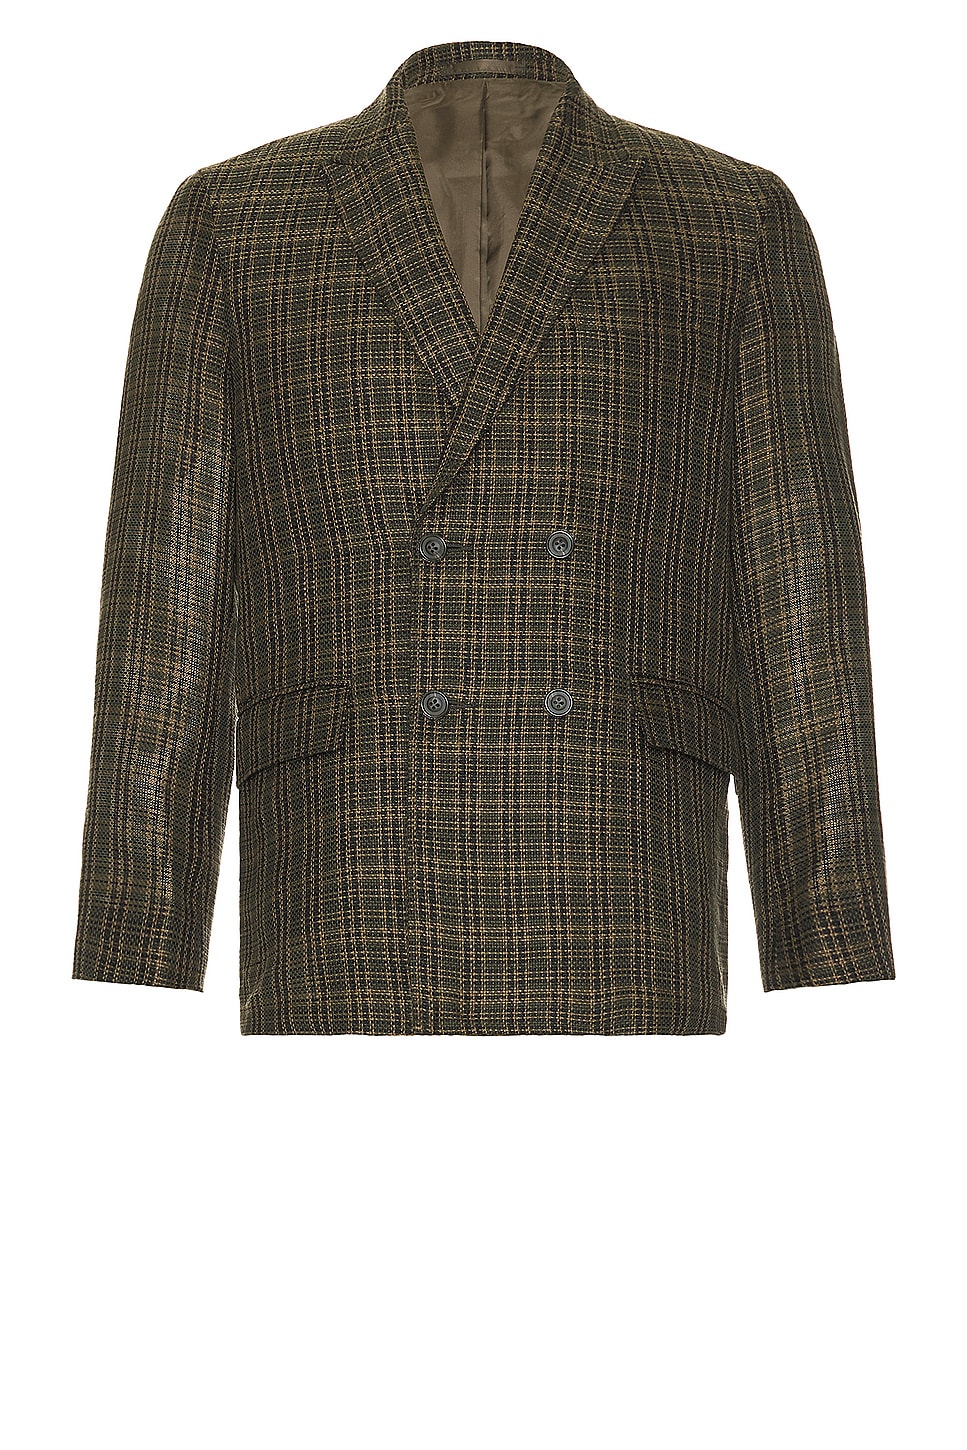 Image 1 of Beams Plus 4b Double Breasted Linen Mesh Plaid in Olive